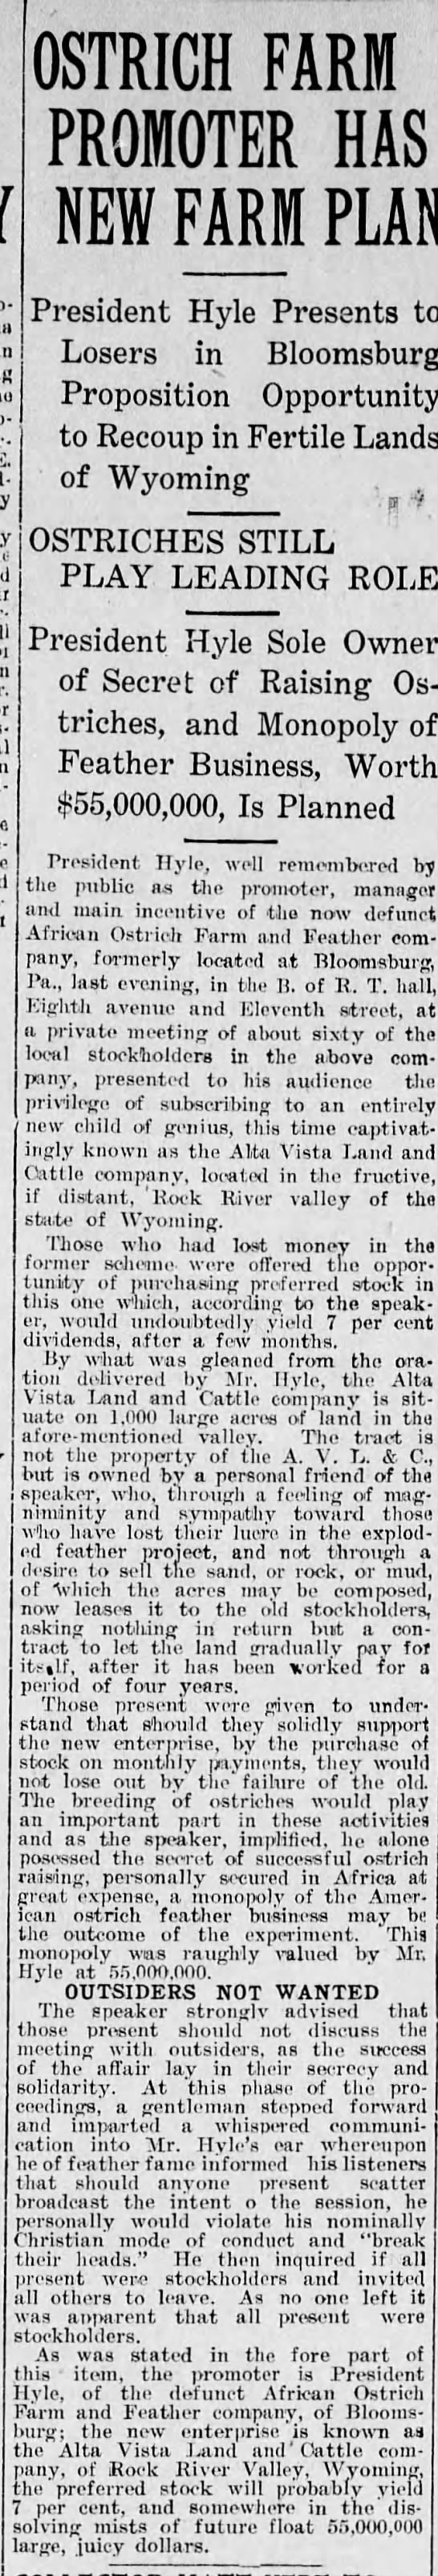 Hile (misspelled) wanted to start a venture in Wyoming? - 